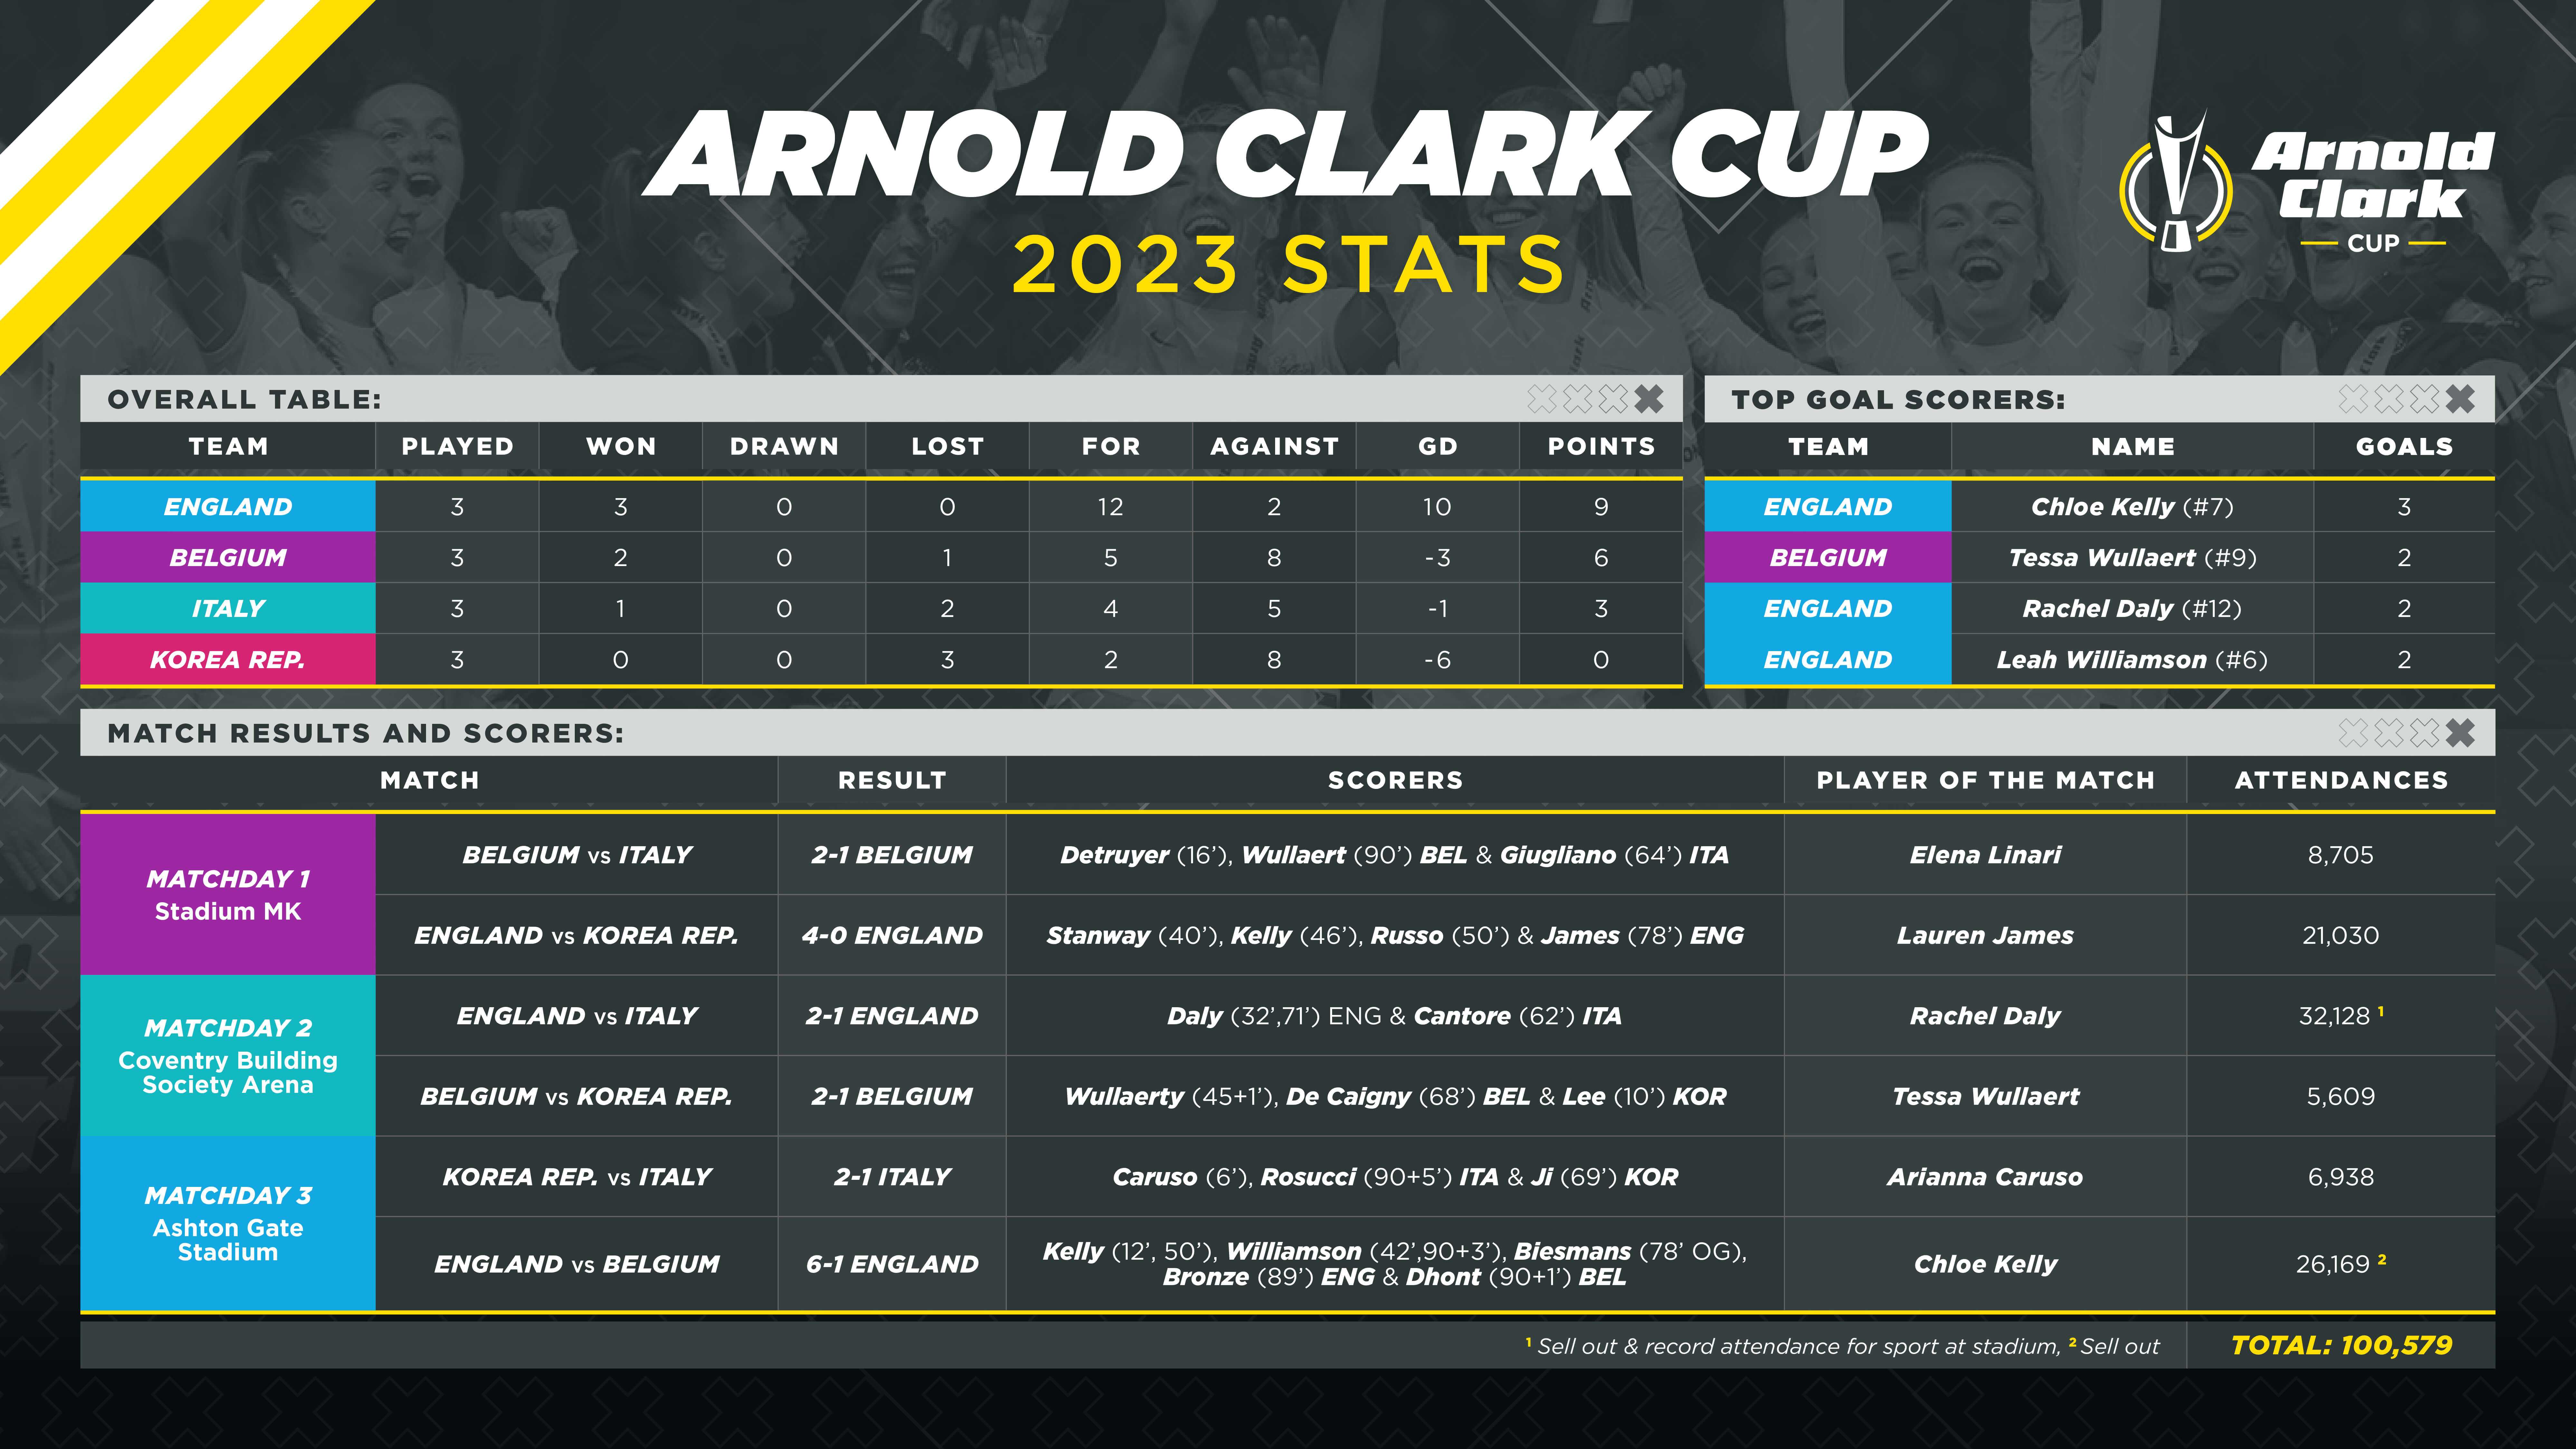 2023 Stats for Arnold Clark Cup